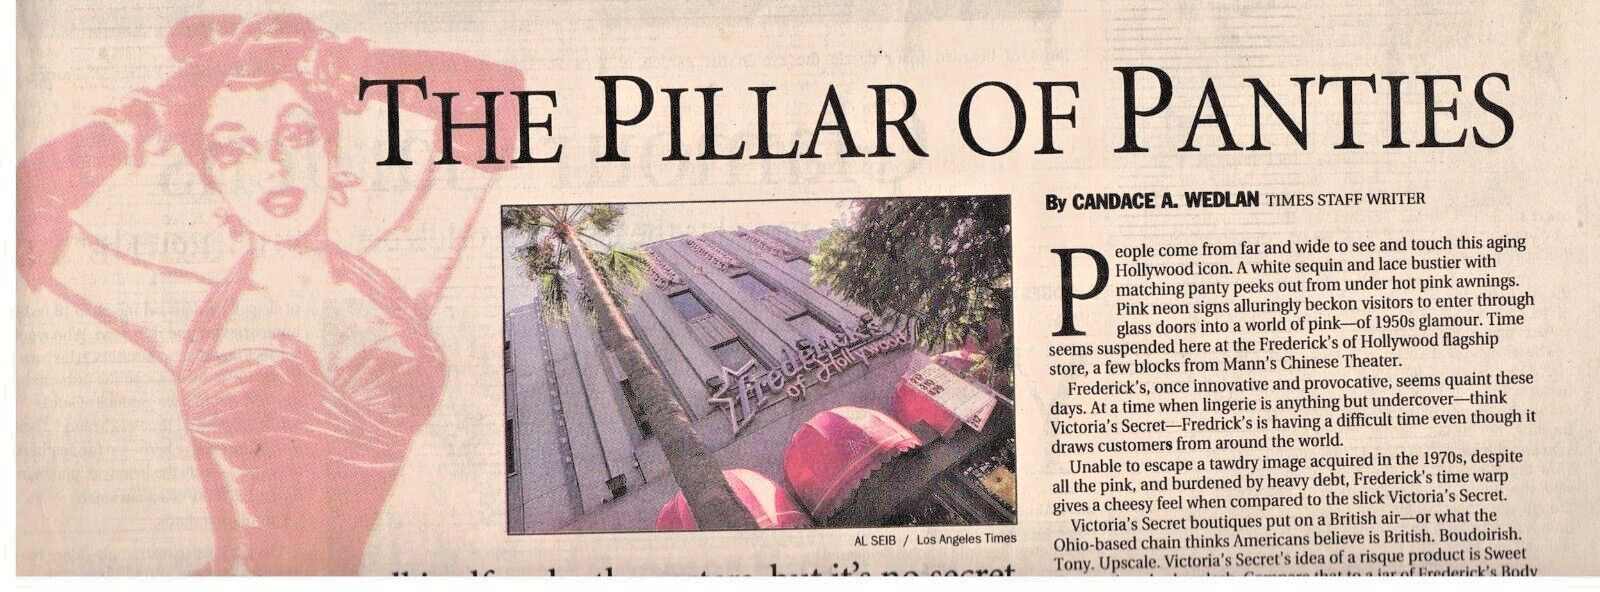 Los Angeles Times August 11, 2000, The Pillar of Panties, SO. CA. Living Section